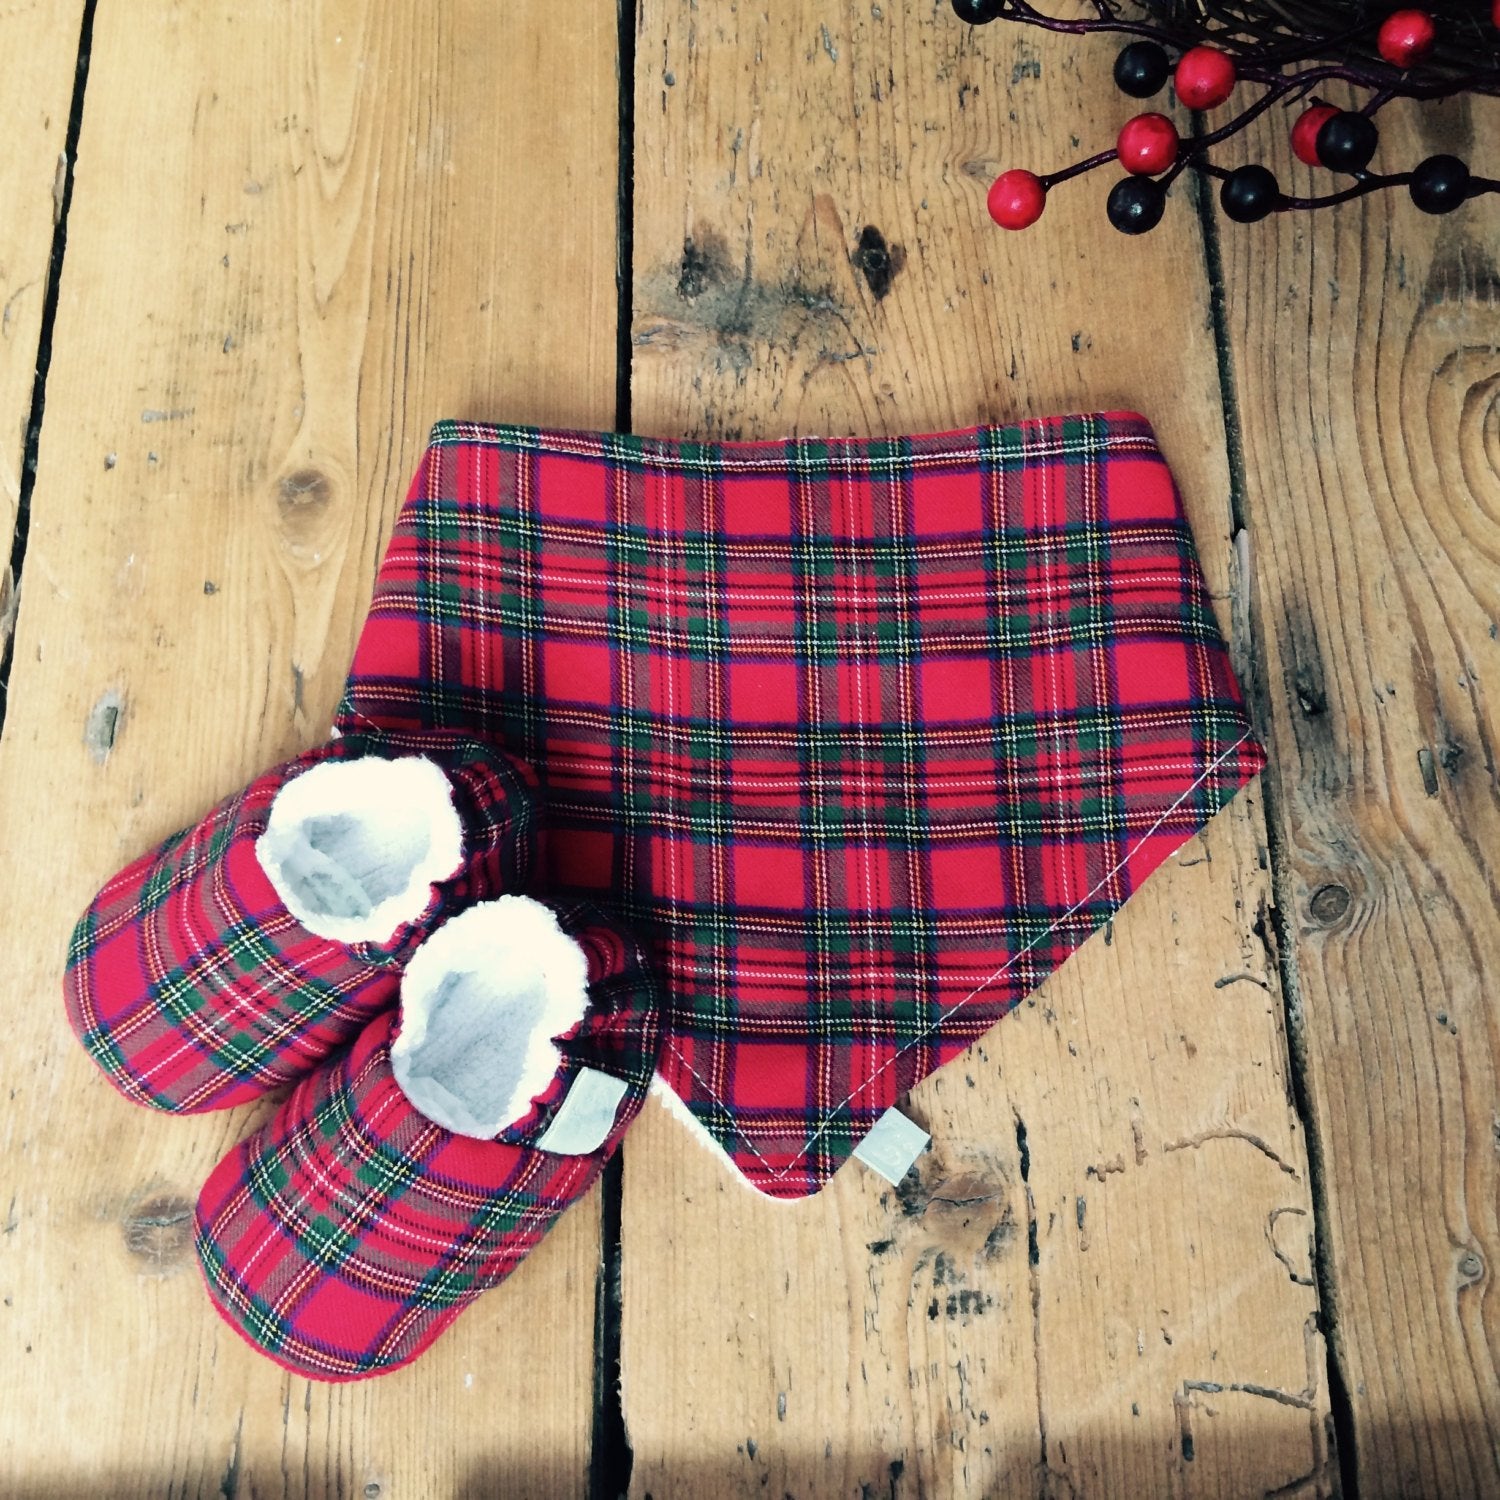 Freckles and Daisies Tartan Bib and Baby Shoes set